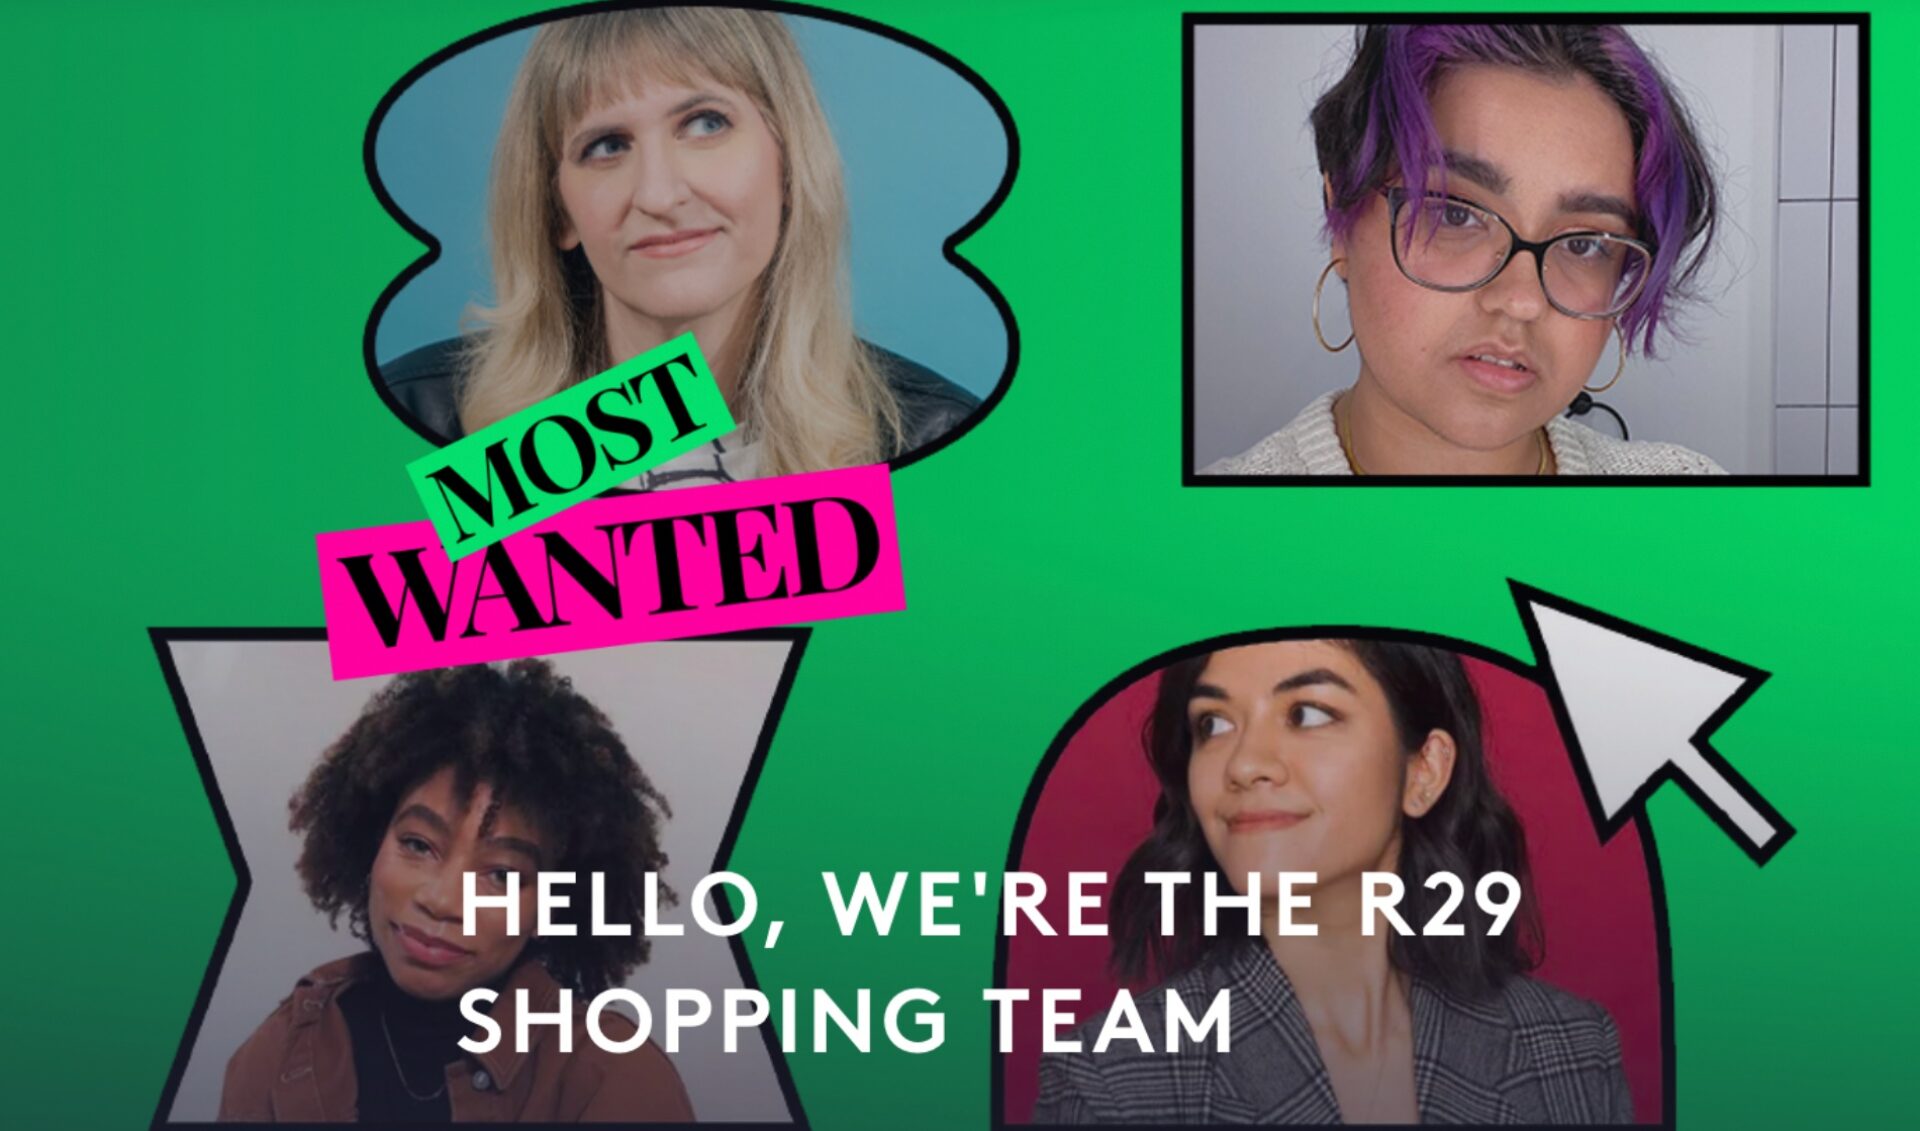 Twitch has launched shoppable streams. Now third-party brands like Refinery29 are joining the fun.